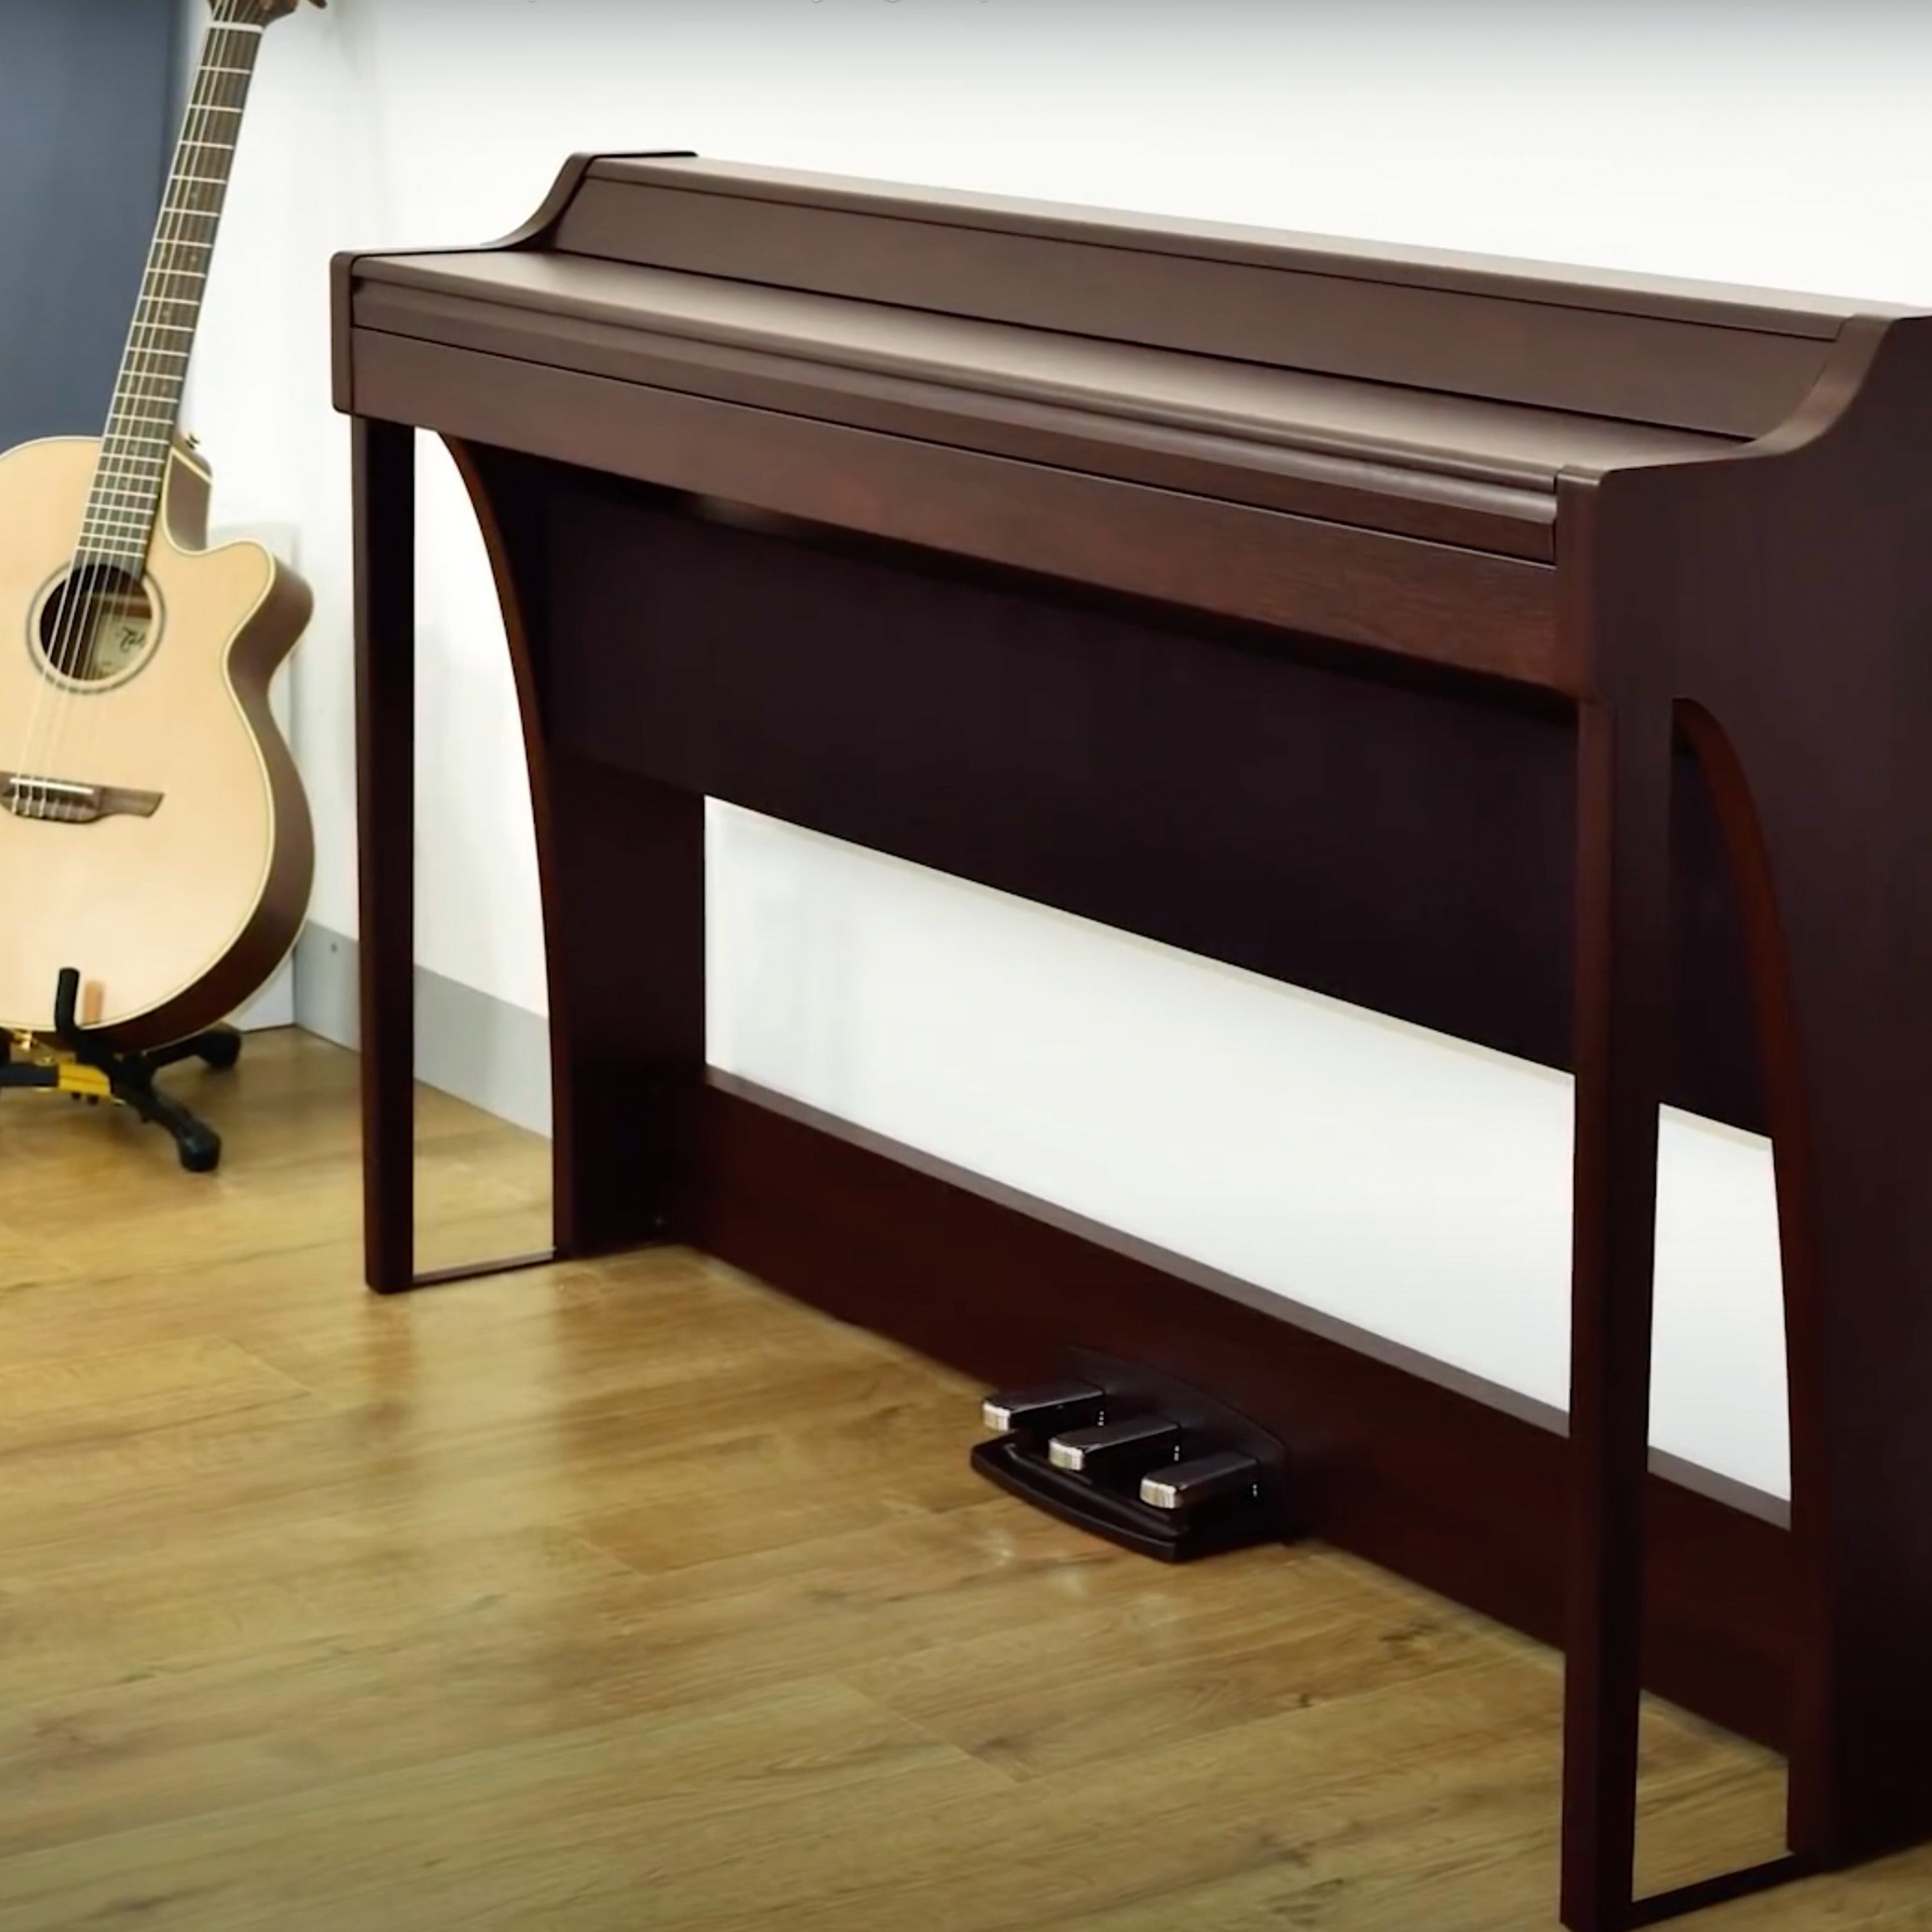 Korg G1B Air Digital Piano - Brown - with the key cover closed in a stylish living space